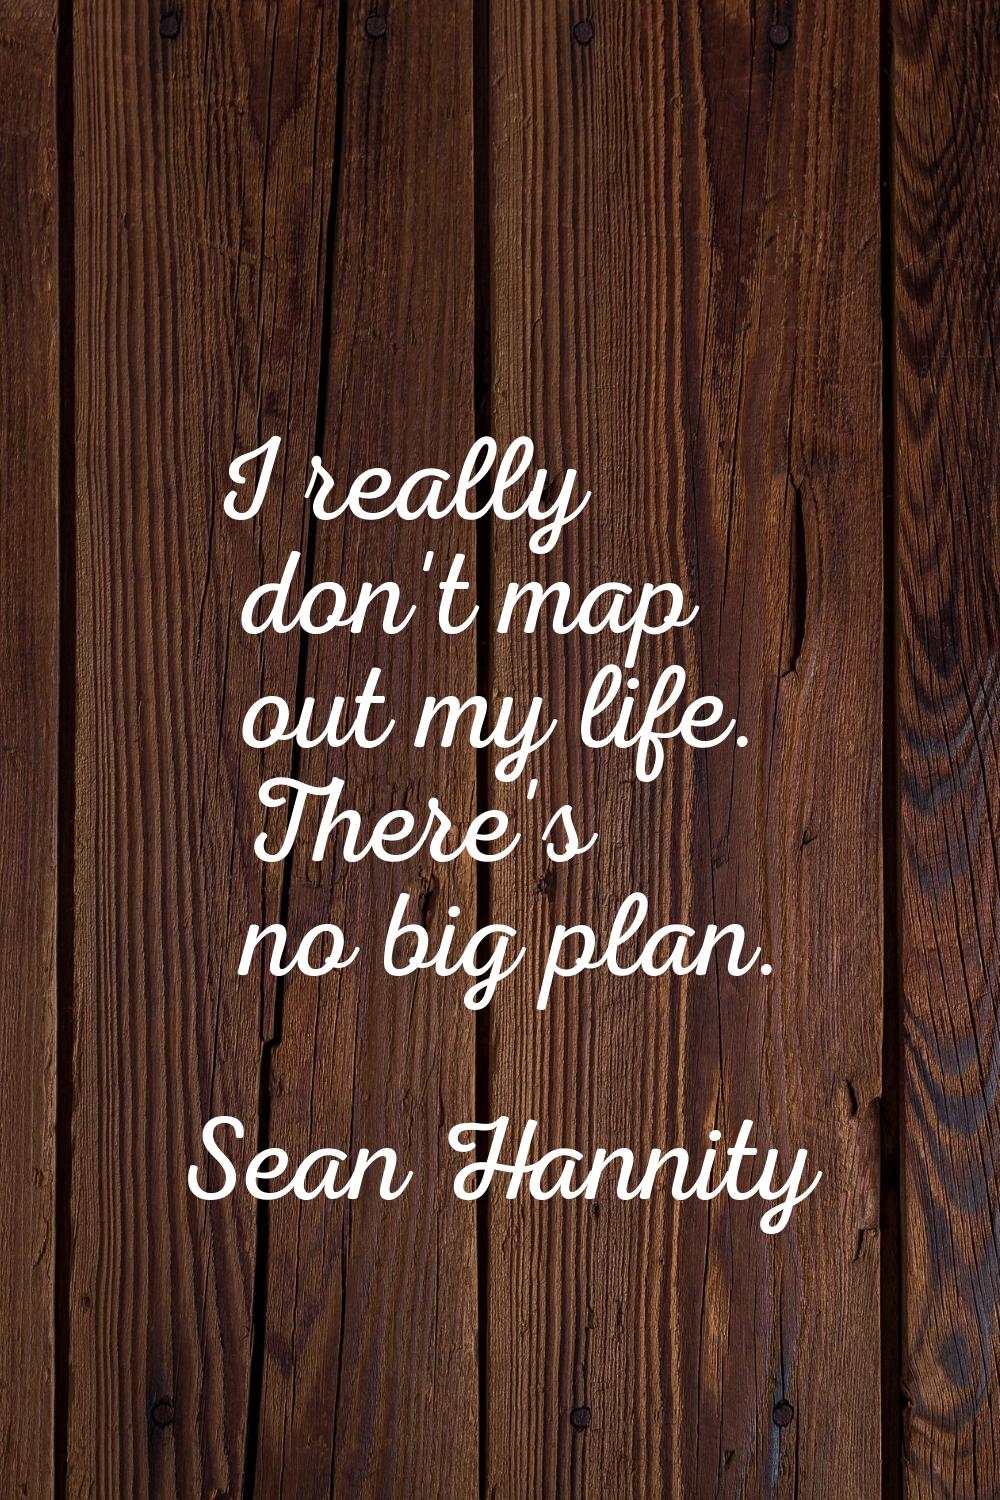 I really don't map out my life. There's no big plan.